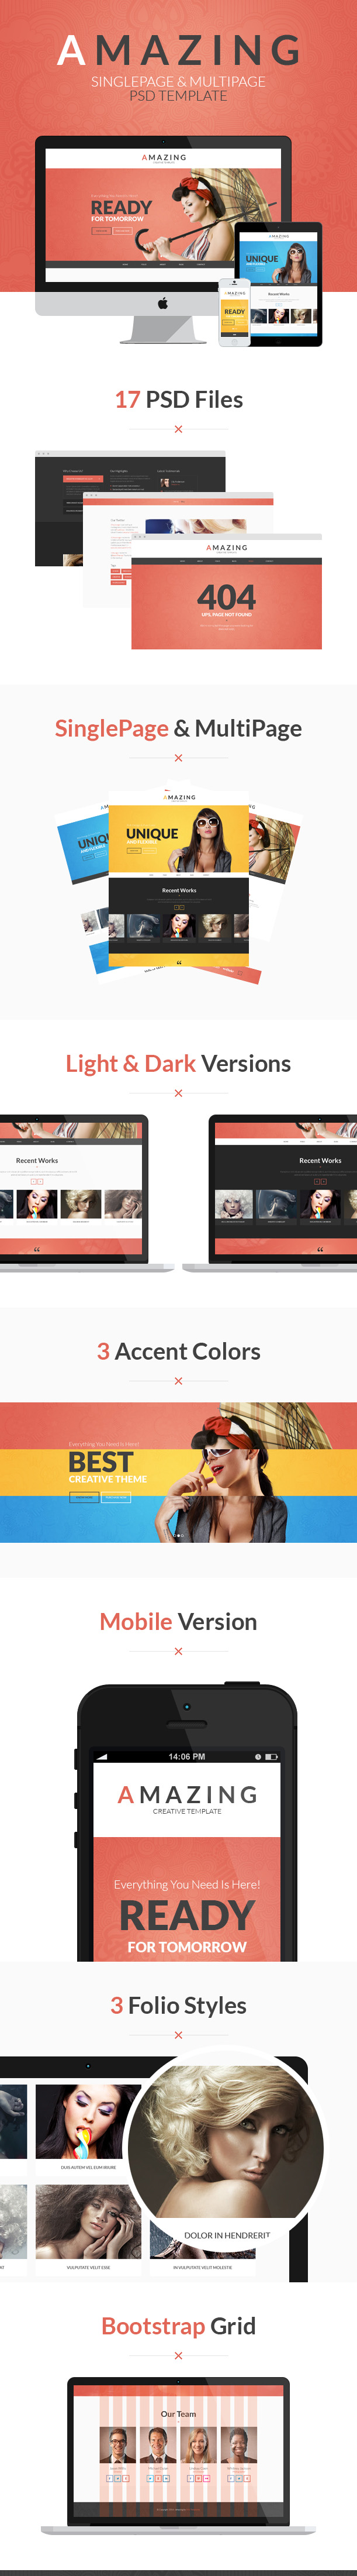 Amazing PSD bootstrap template